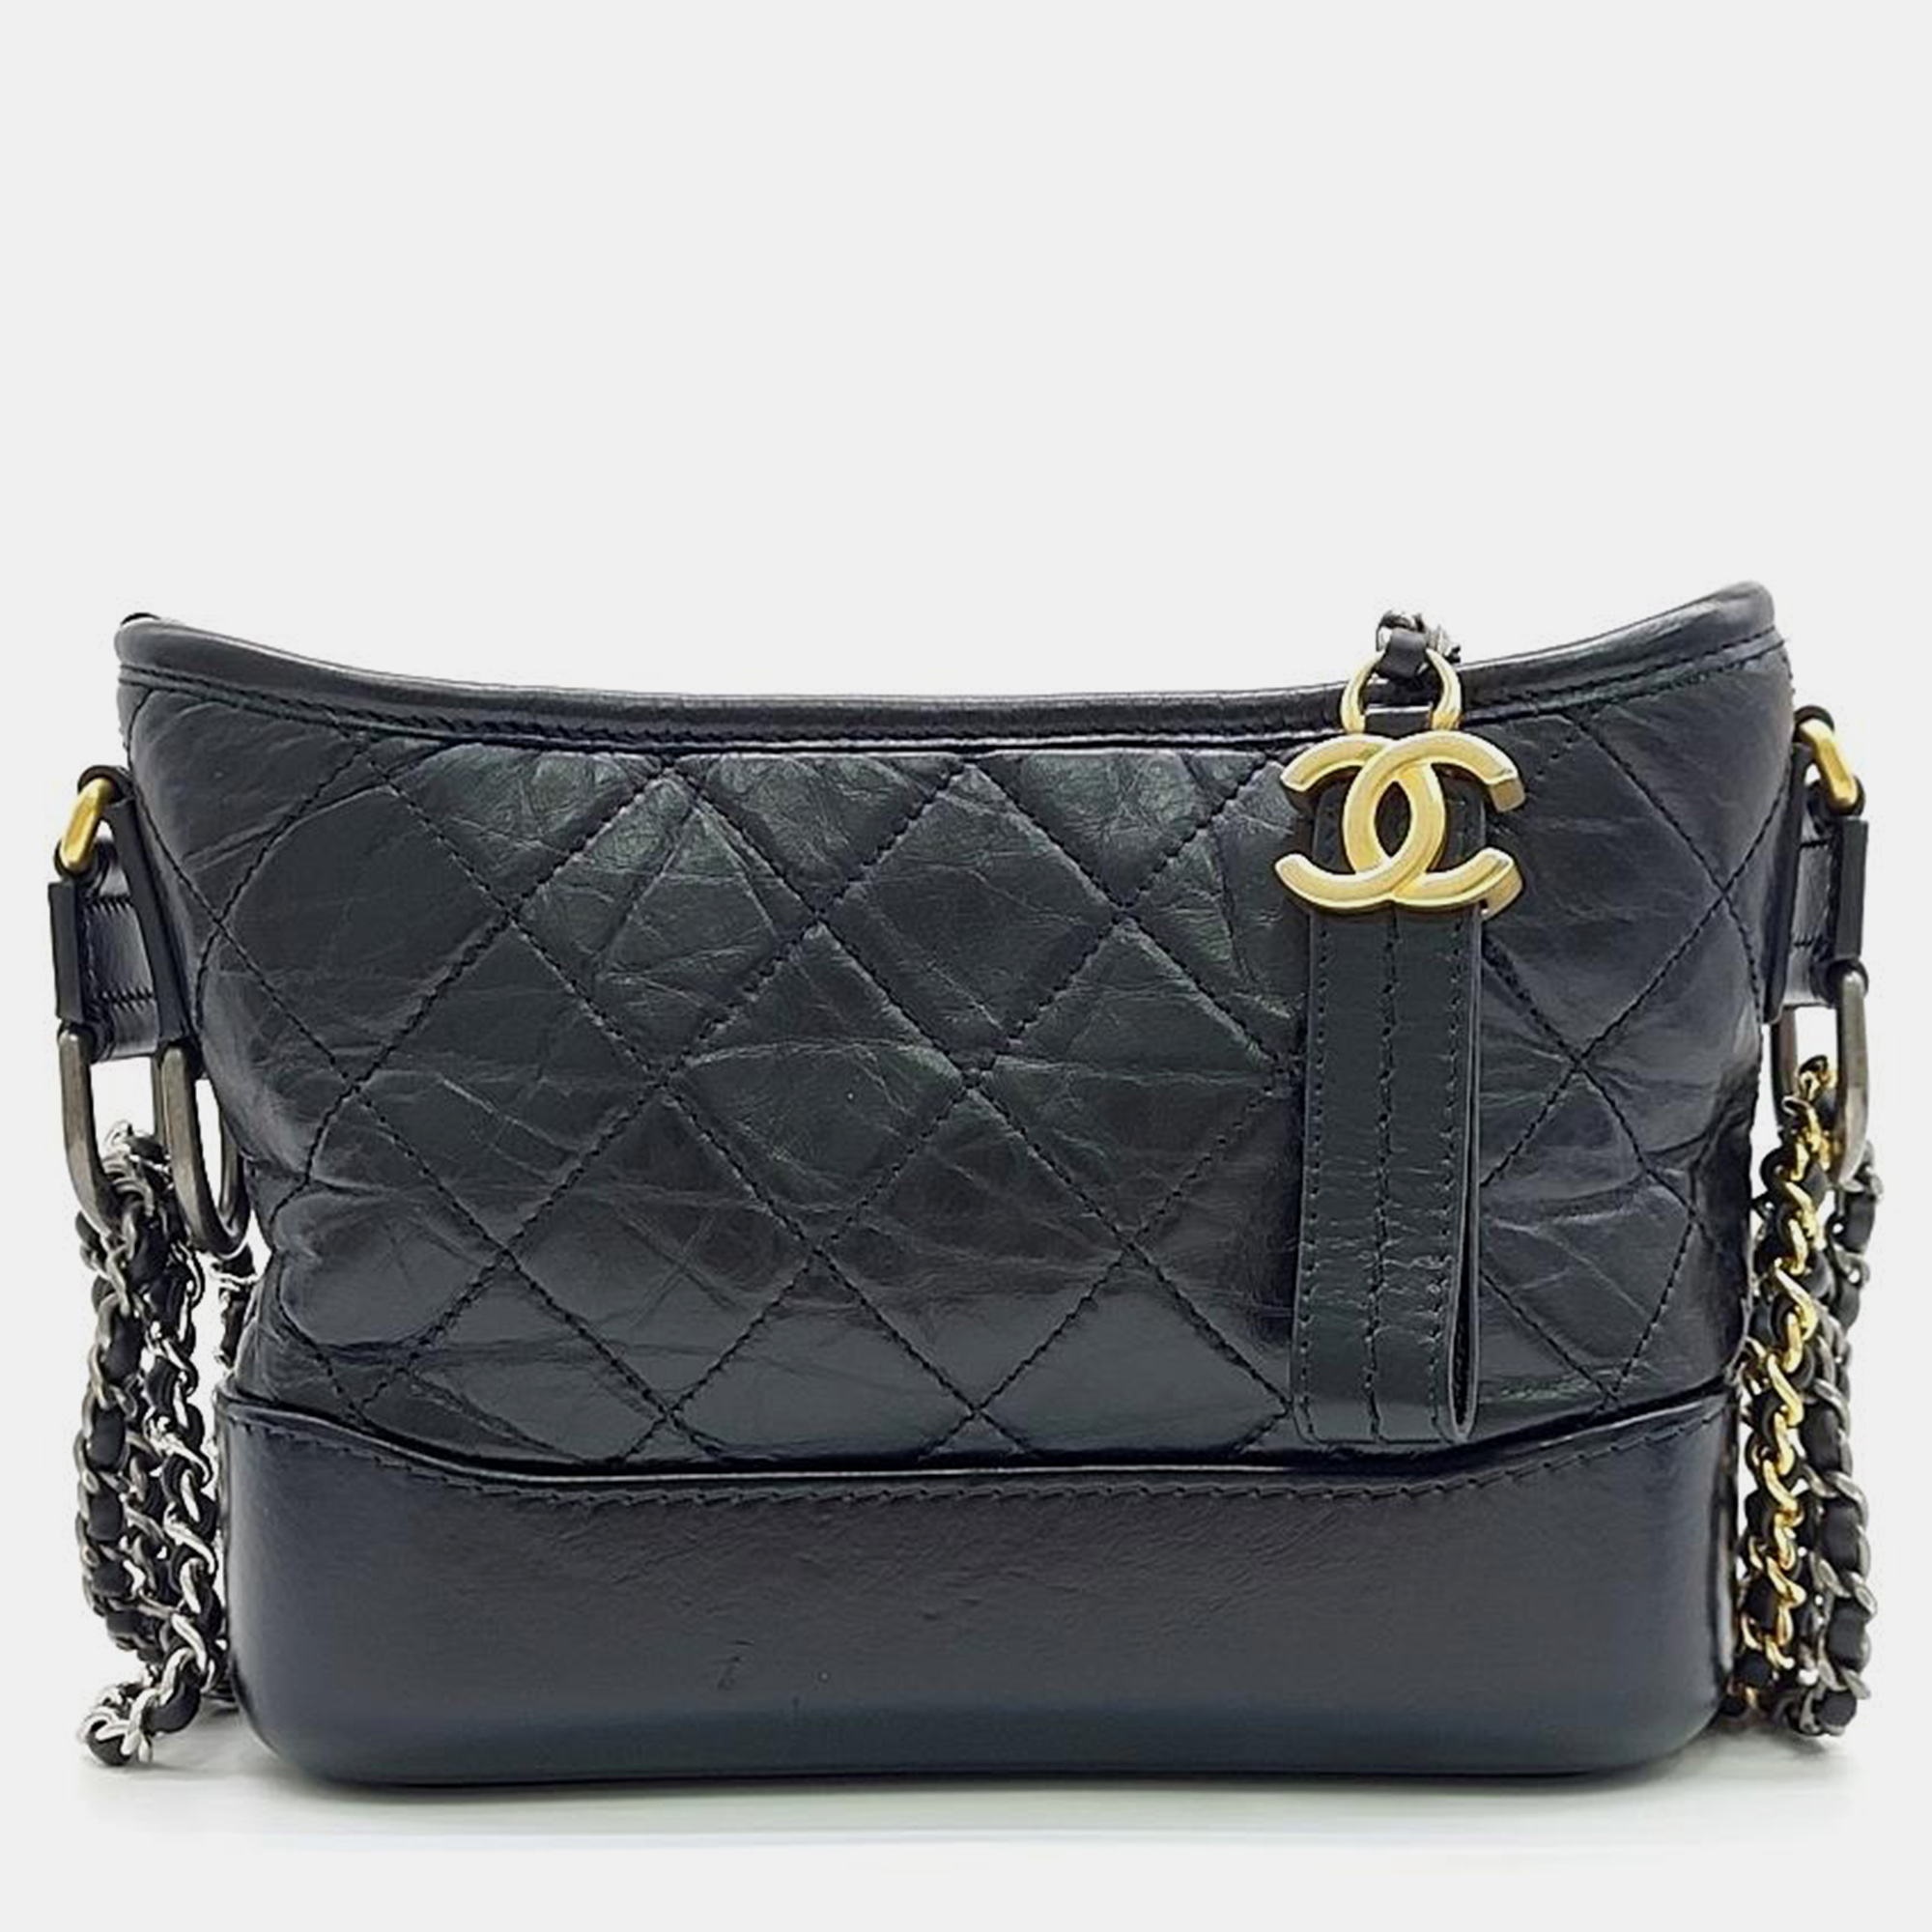 

Chanel Black Leather Small Gabrielle Hobo Bag